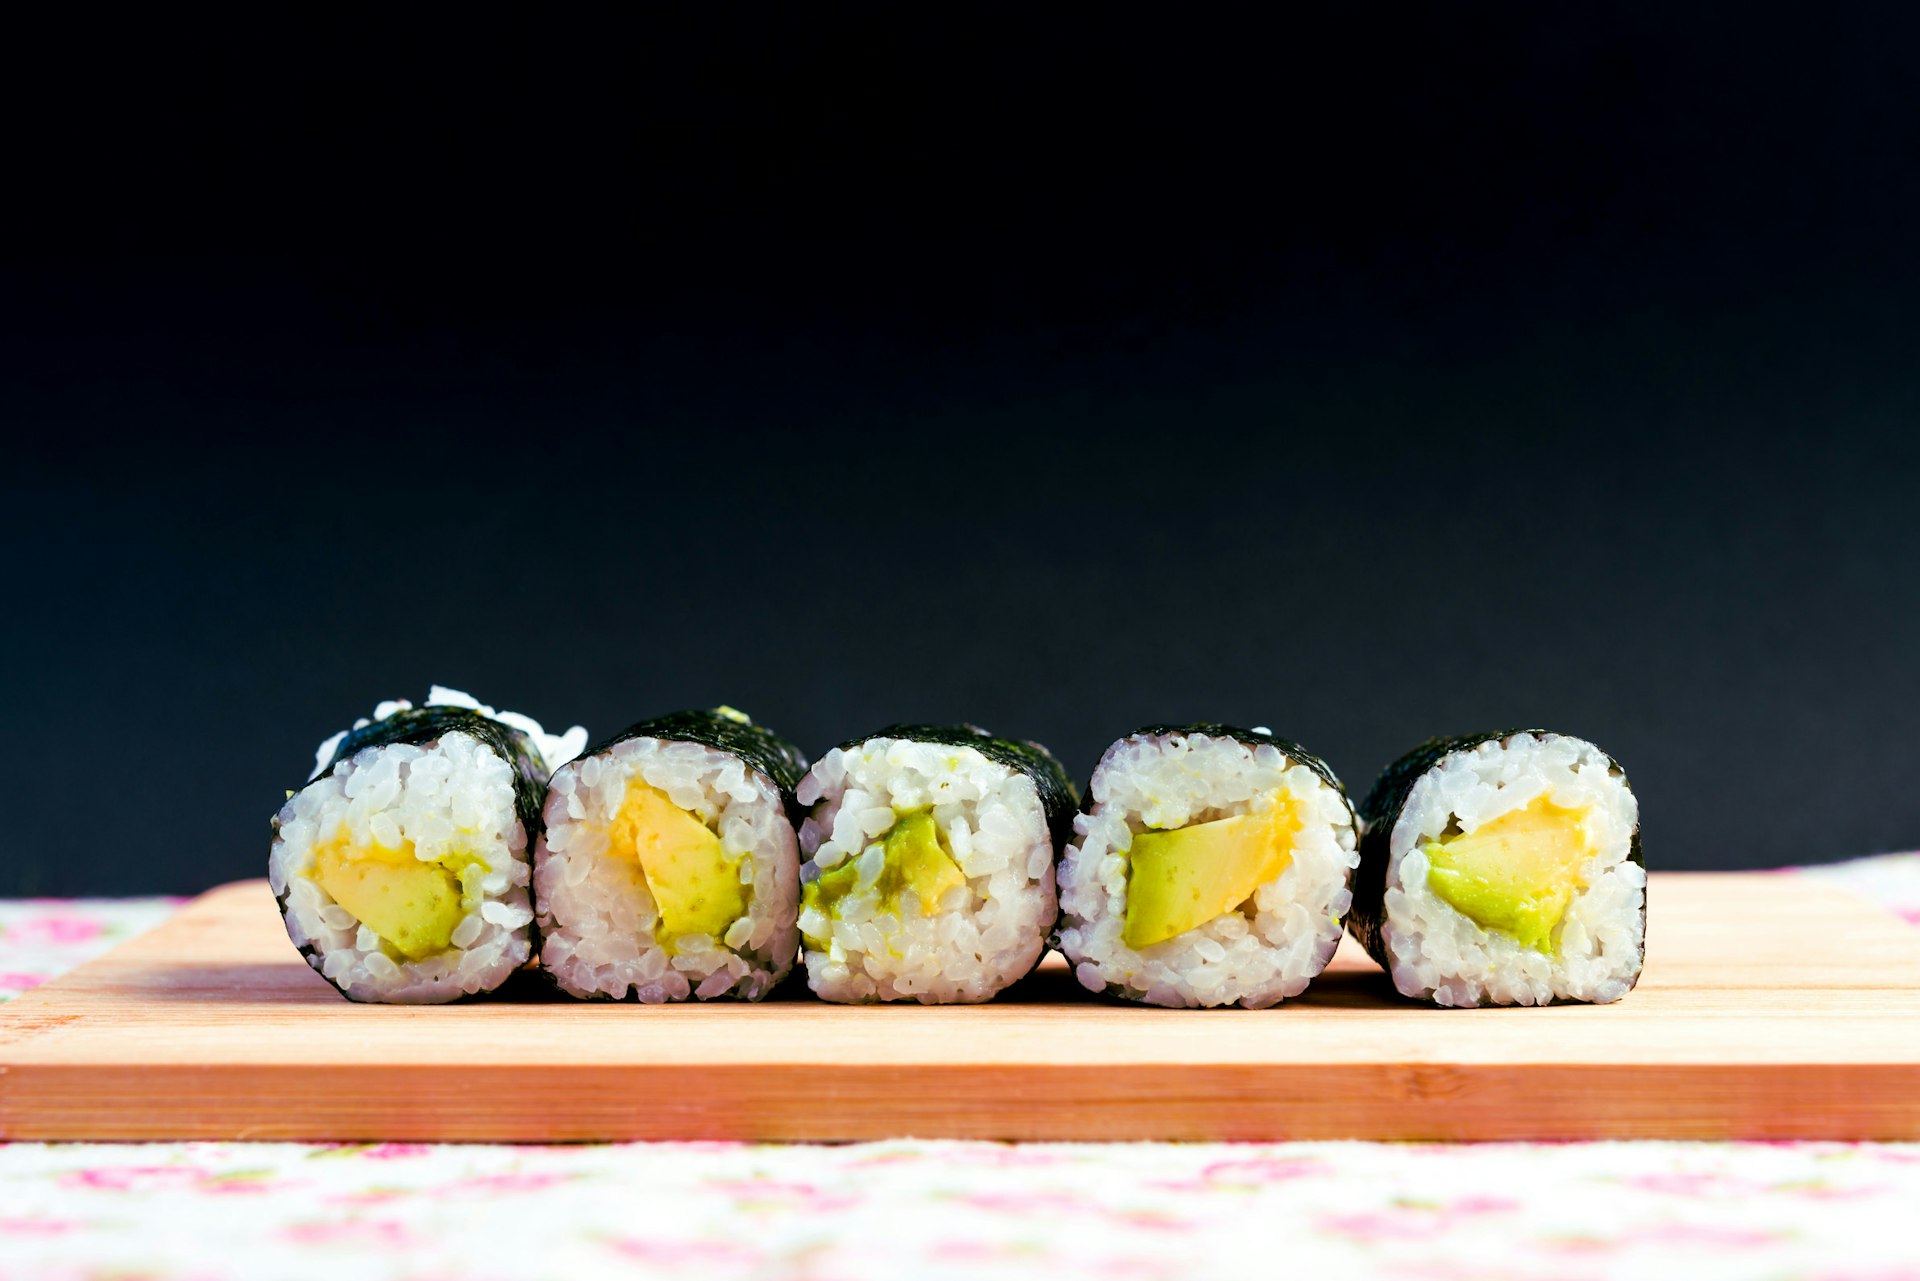 Hand-rolled sushi – just one of the fresh tastes people crave on a trek through the Himalaya © Pinghung Chen/EyeEm/Getty Images